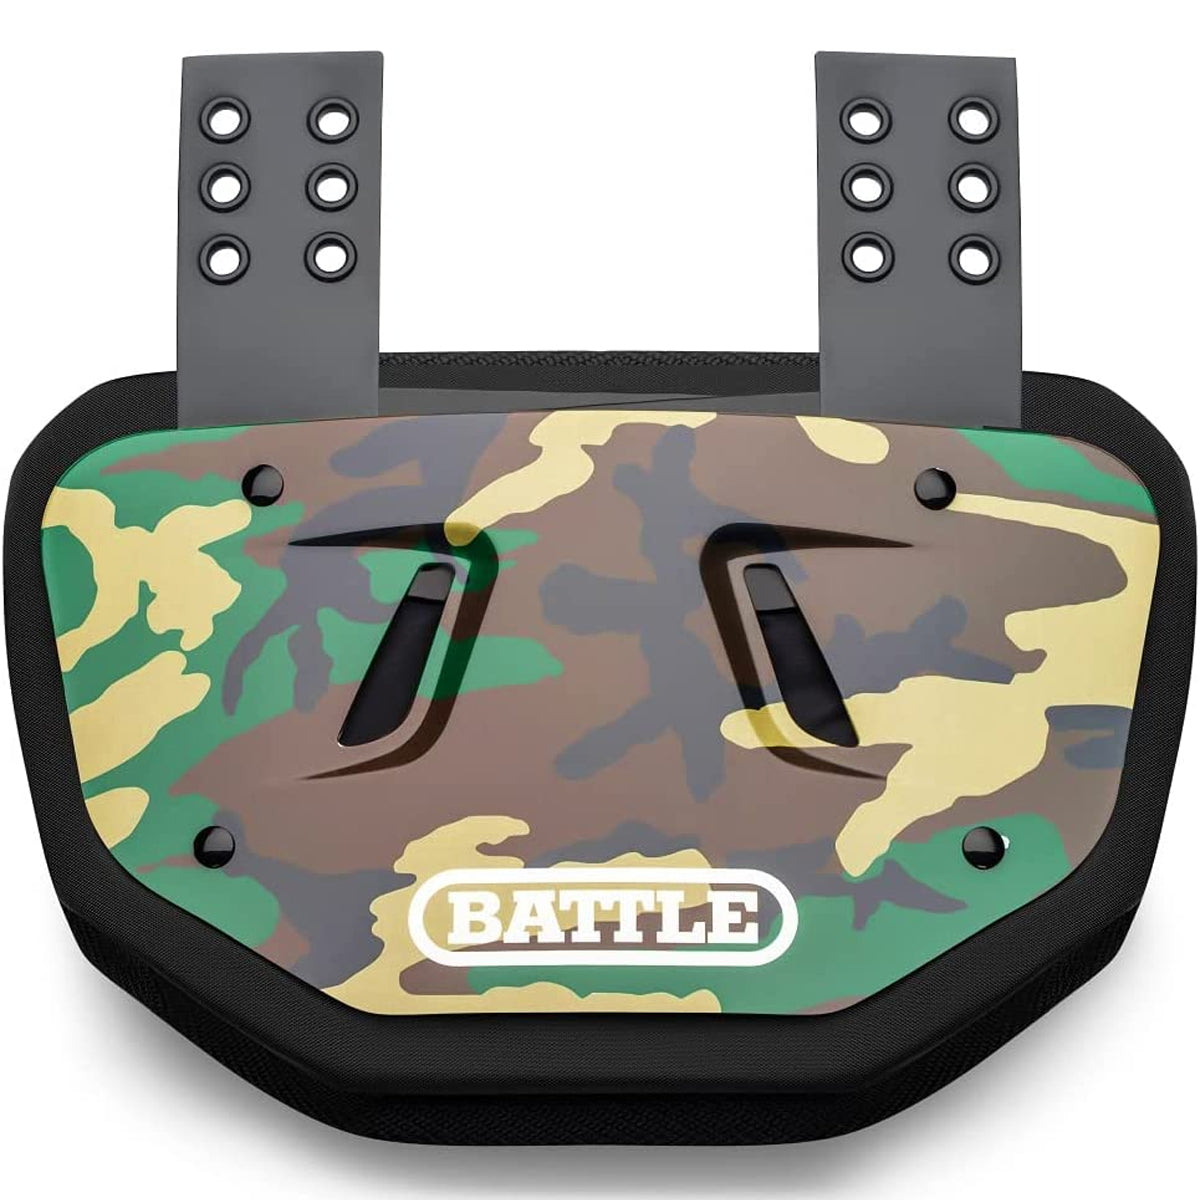 Battle Sports Chrome Protective Football Back Plate - Green Camouflage Battle Sports